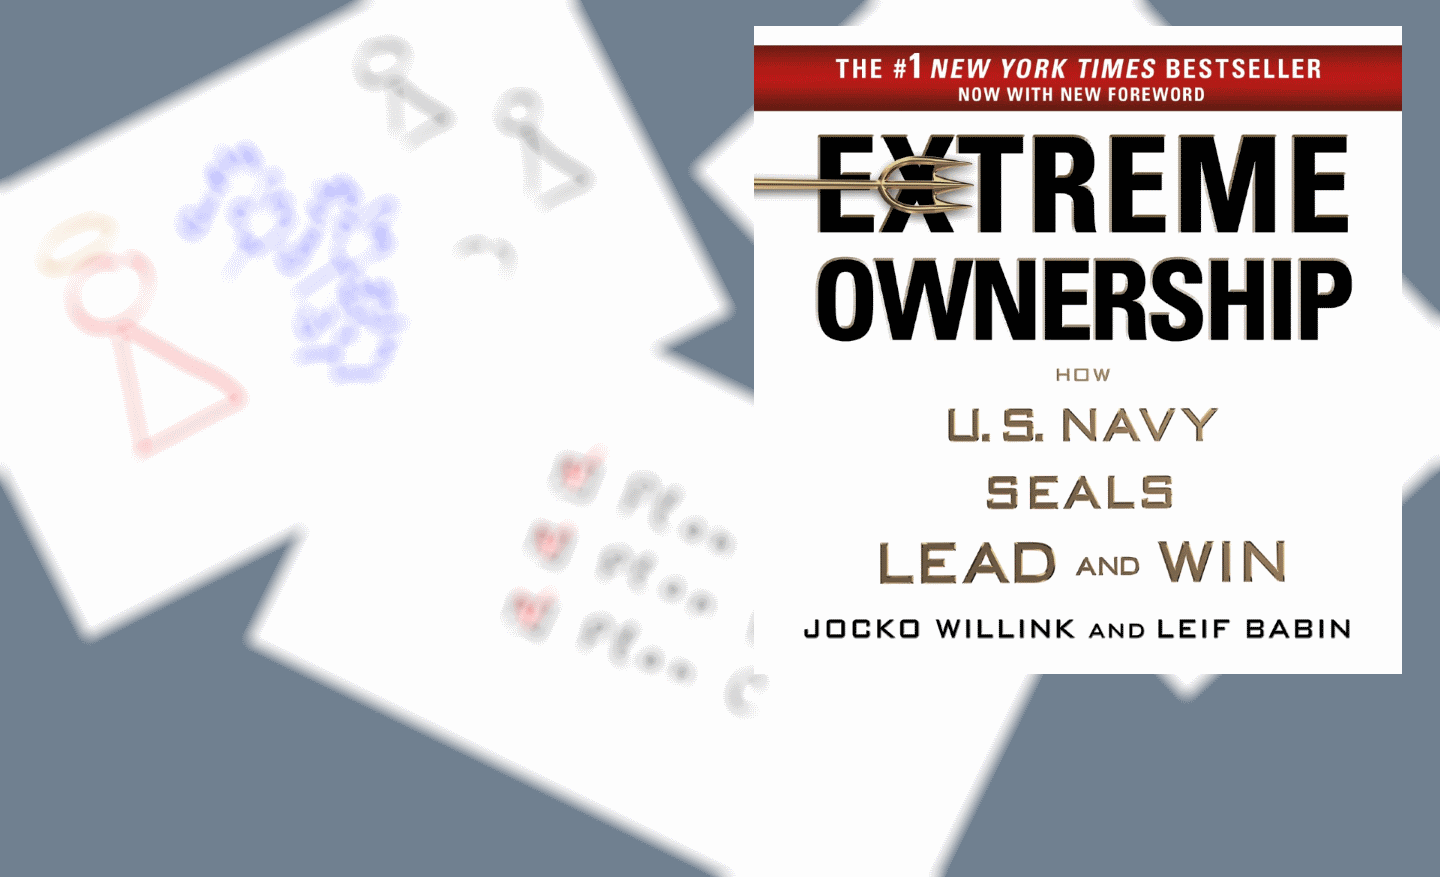 Notes on “Extreme Ownership” by Jocko Willink and Leif Babin (Book Review) - Part 1